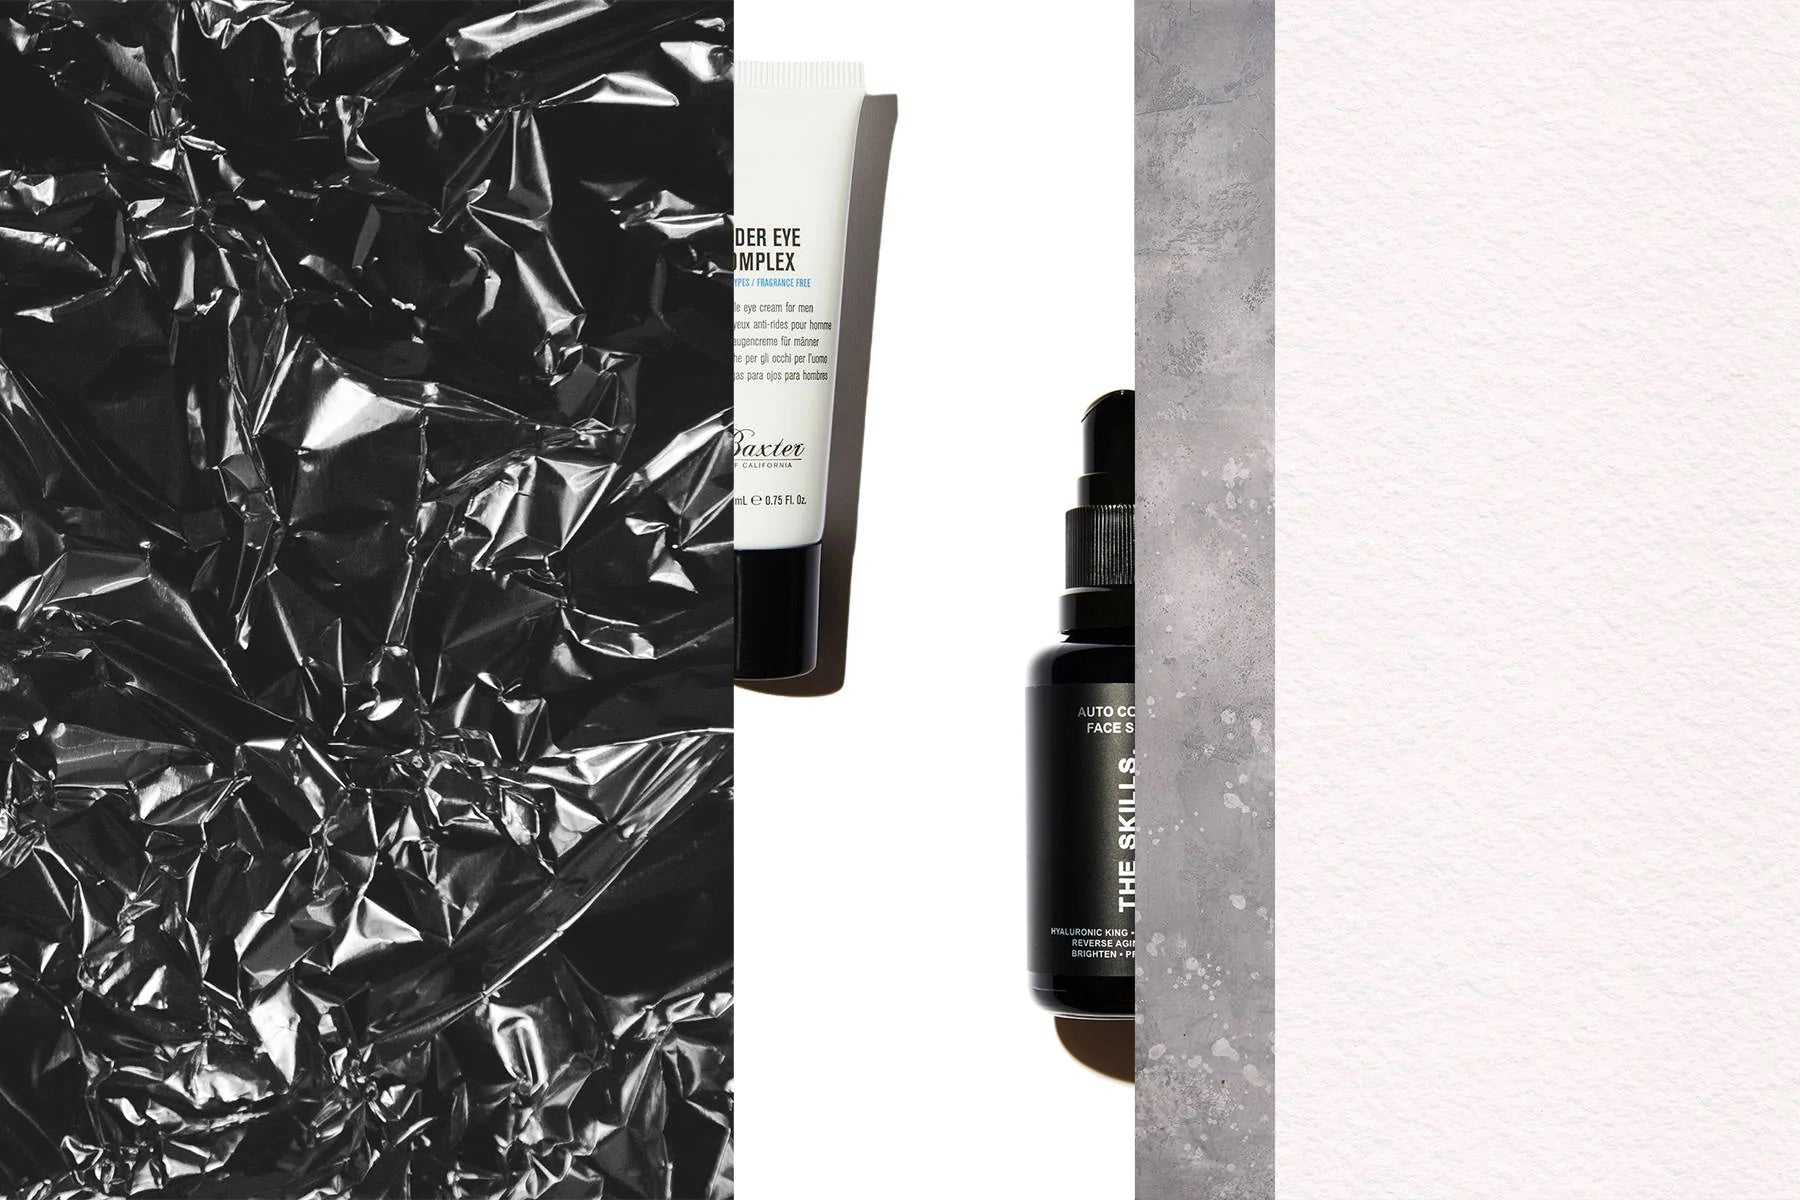 What Are The Best Anti-Wrinkle Products For Men?